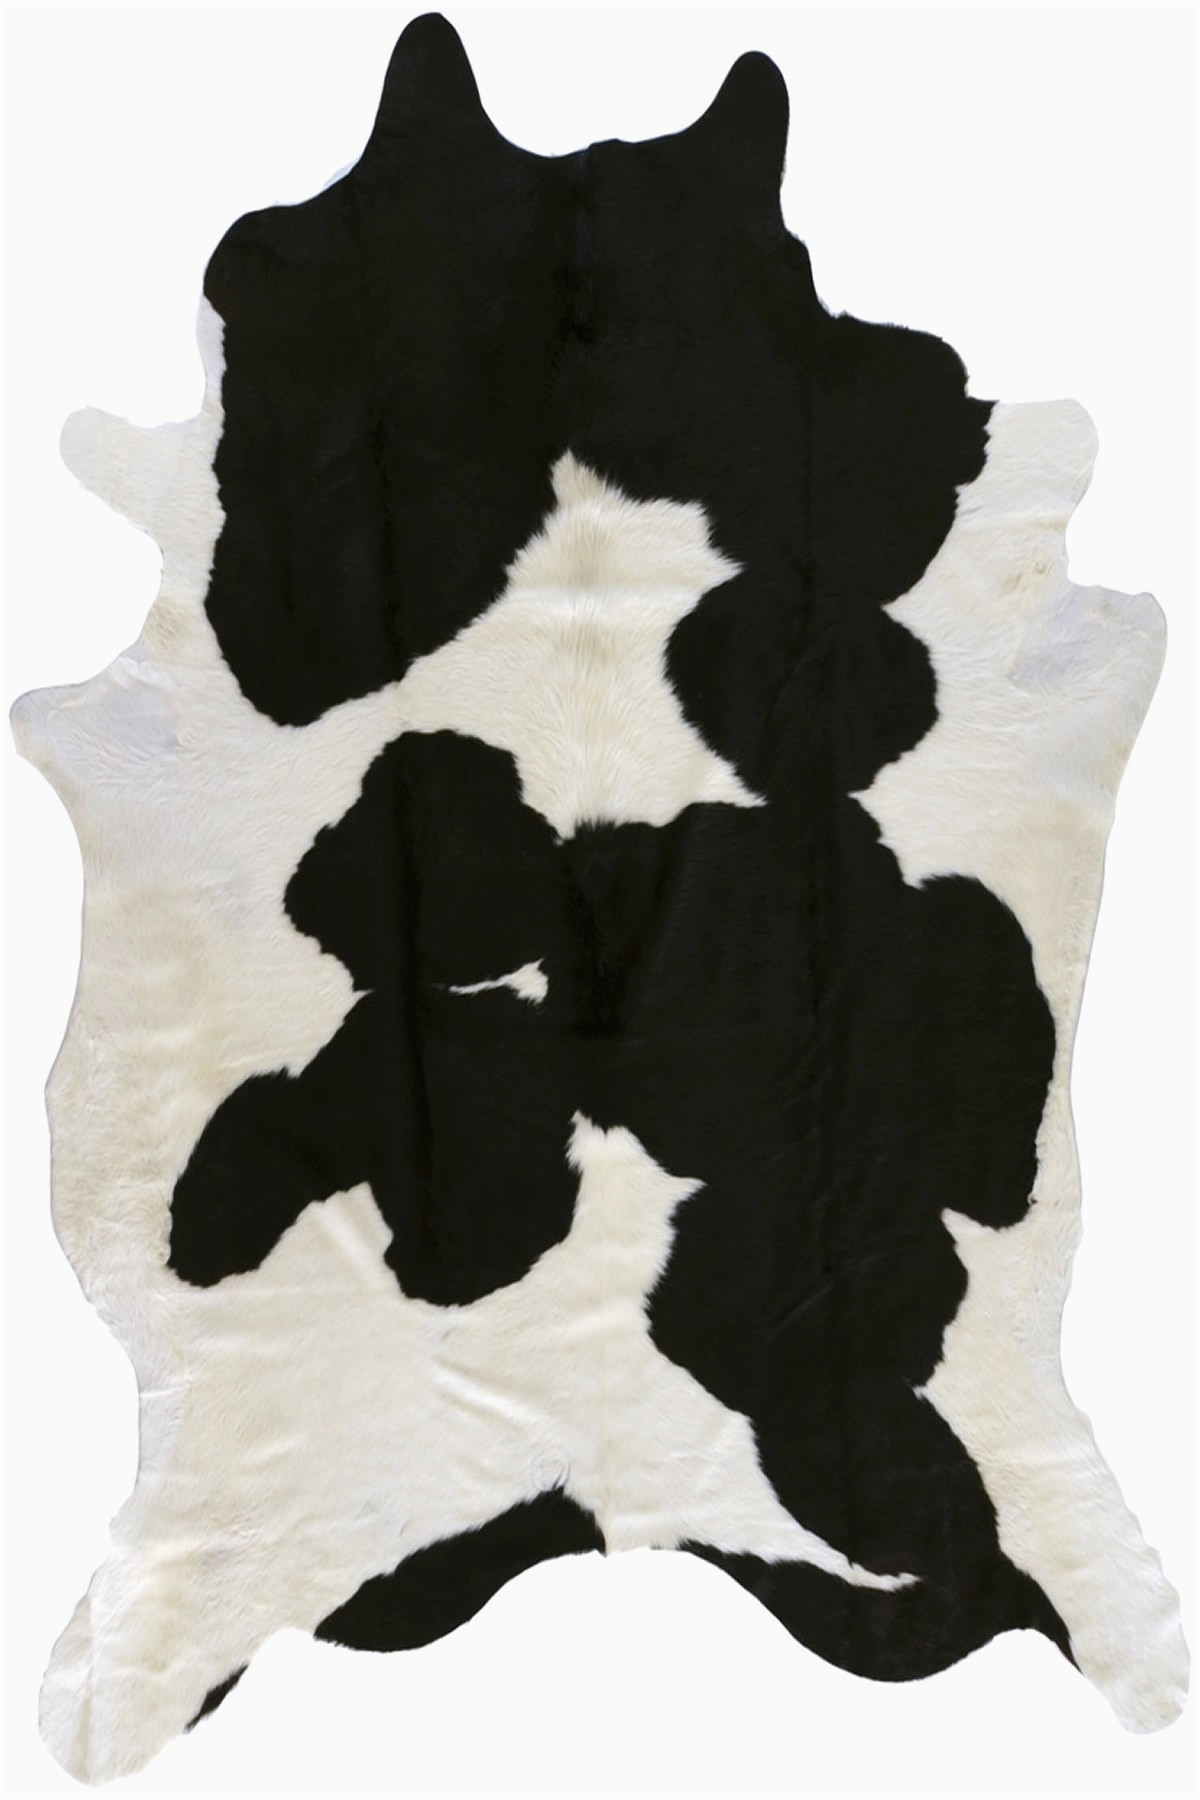 White Fur Bathroom Rugs Decoration Interior Faux Cowhide Bathroom Rugs with Small